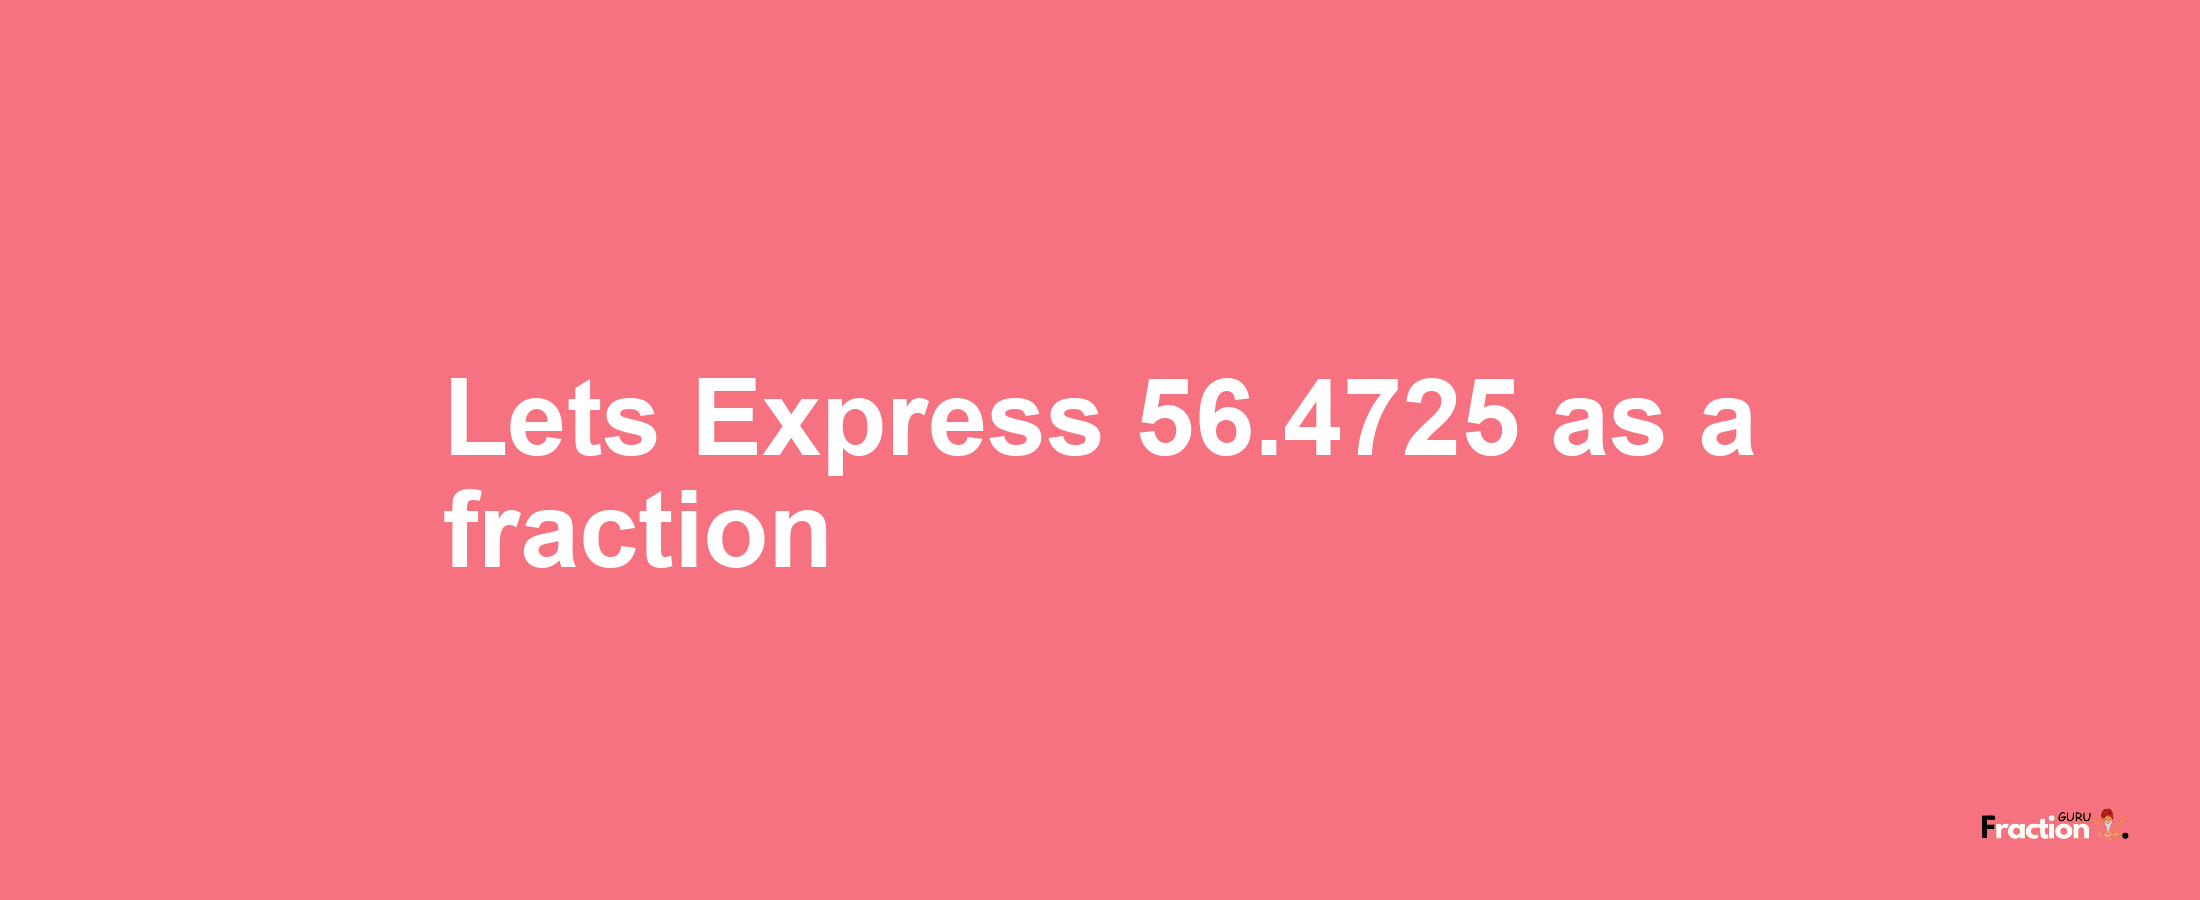 Lets Express 56.4725 as afraction